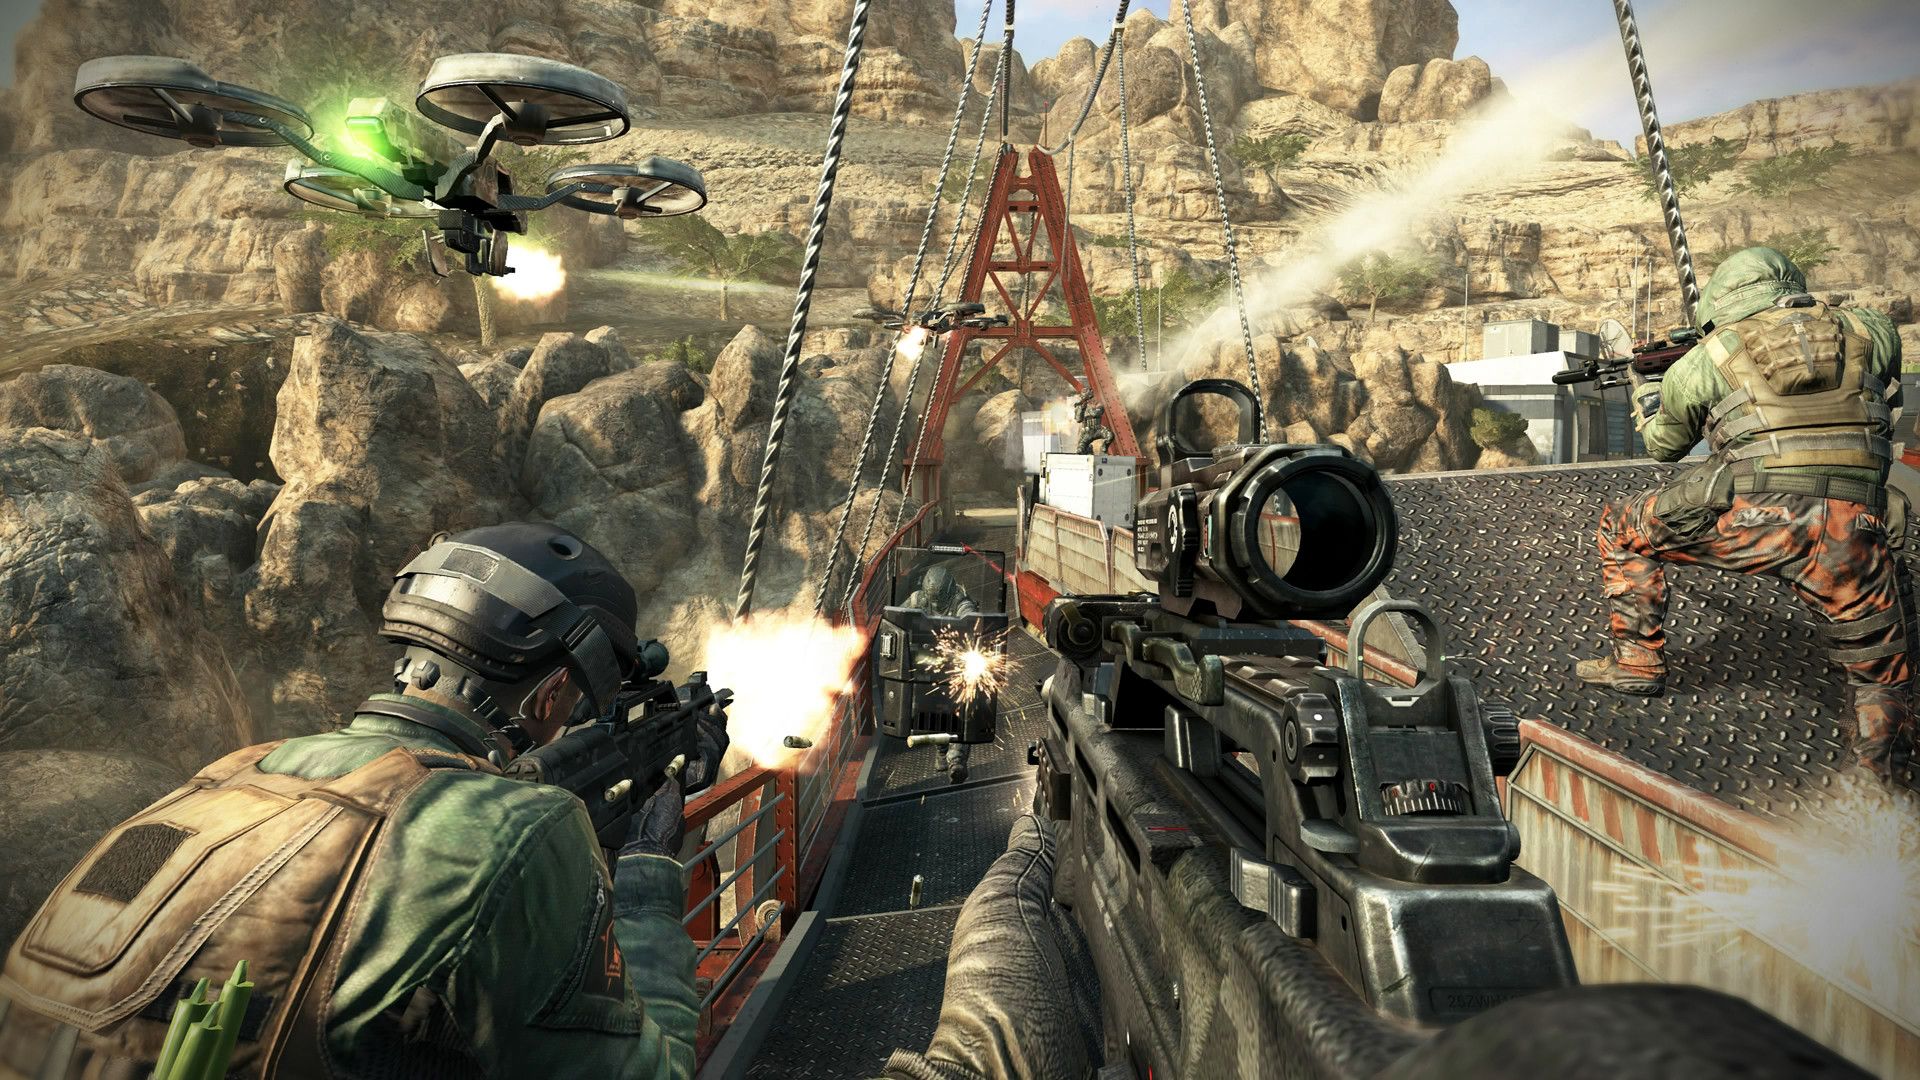 Review: Call of Duty: Black Ops II is more of the same